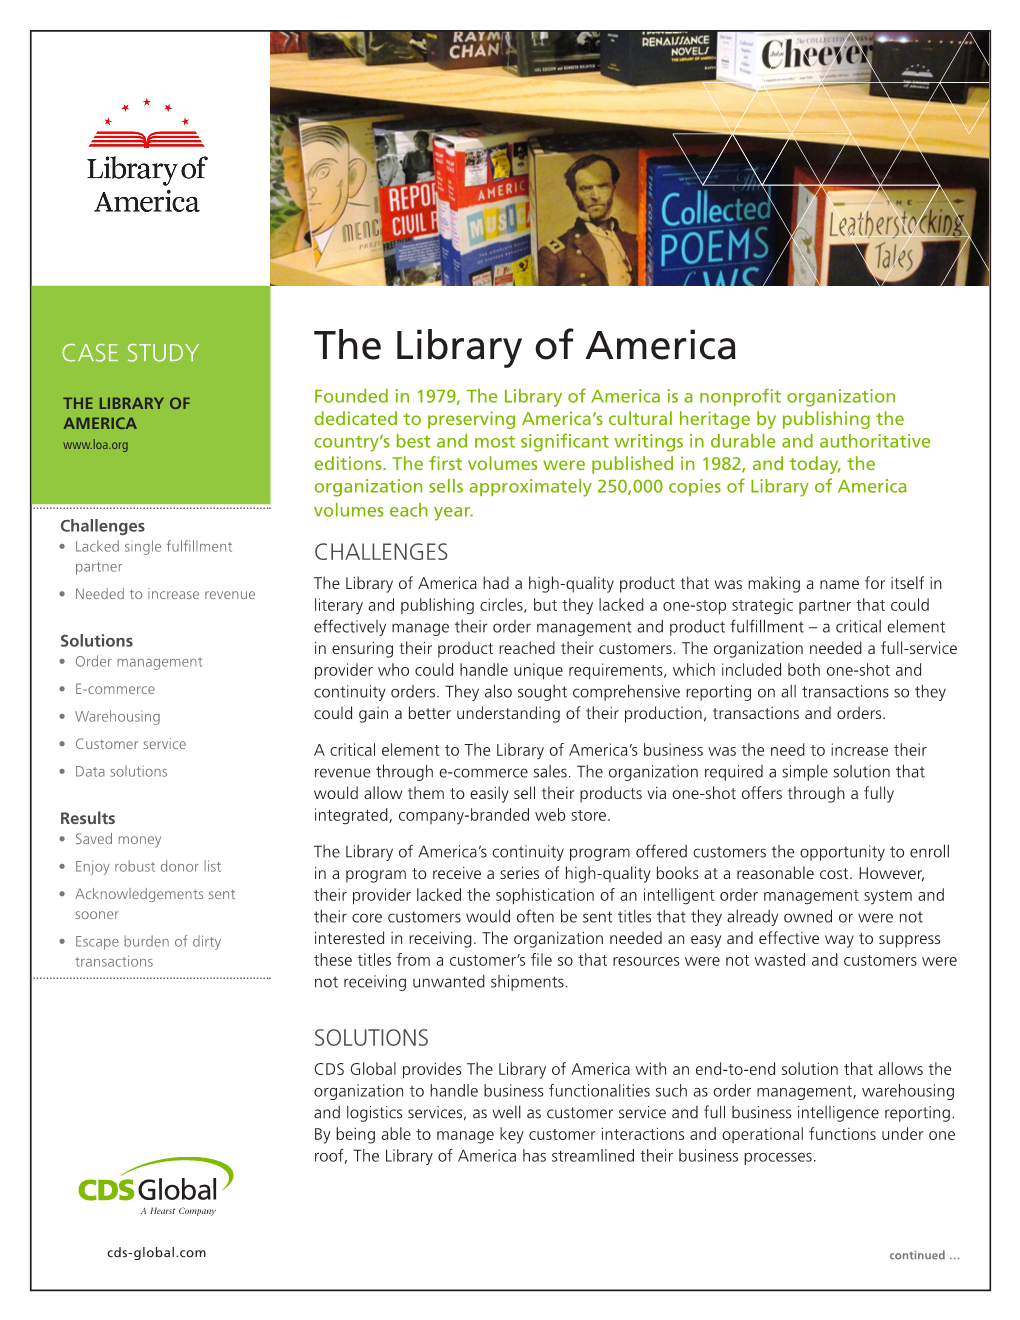 The Library of America